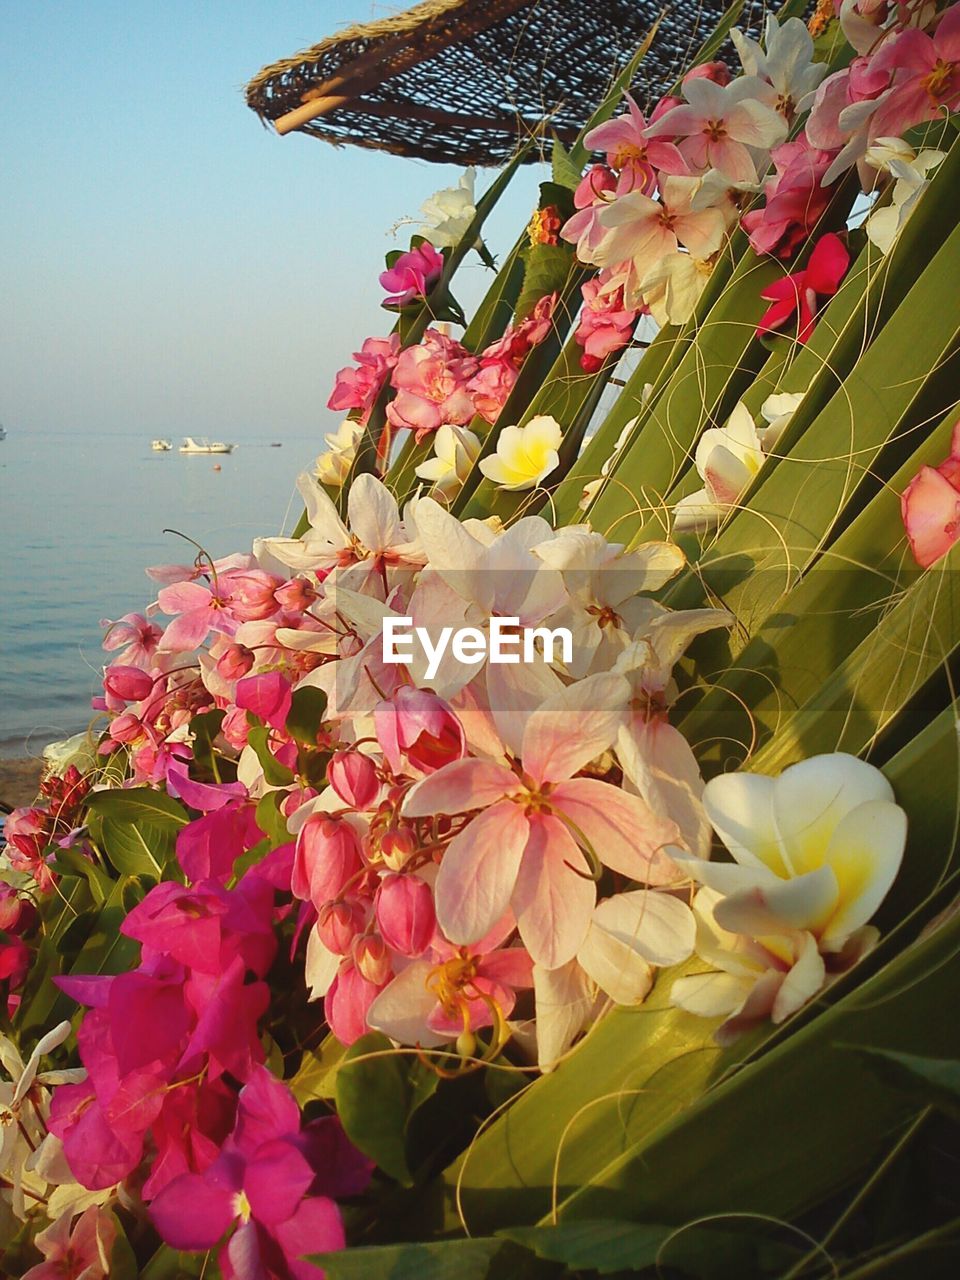 CLOSE-UP OF PINK BOUGAINVILLEA FLOWERS BLOOMING BY SEA